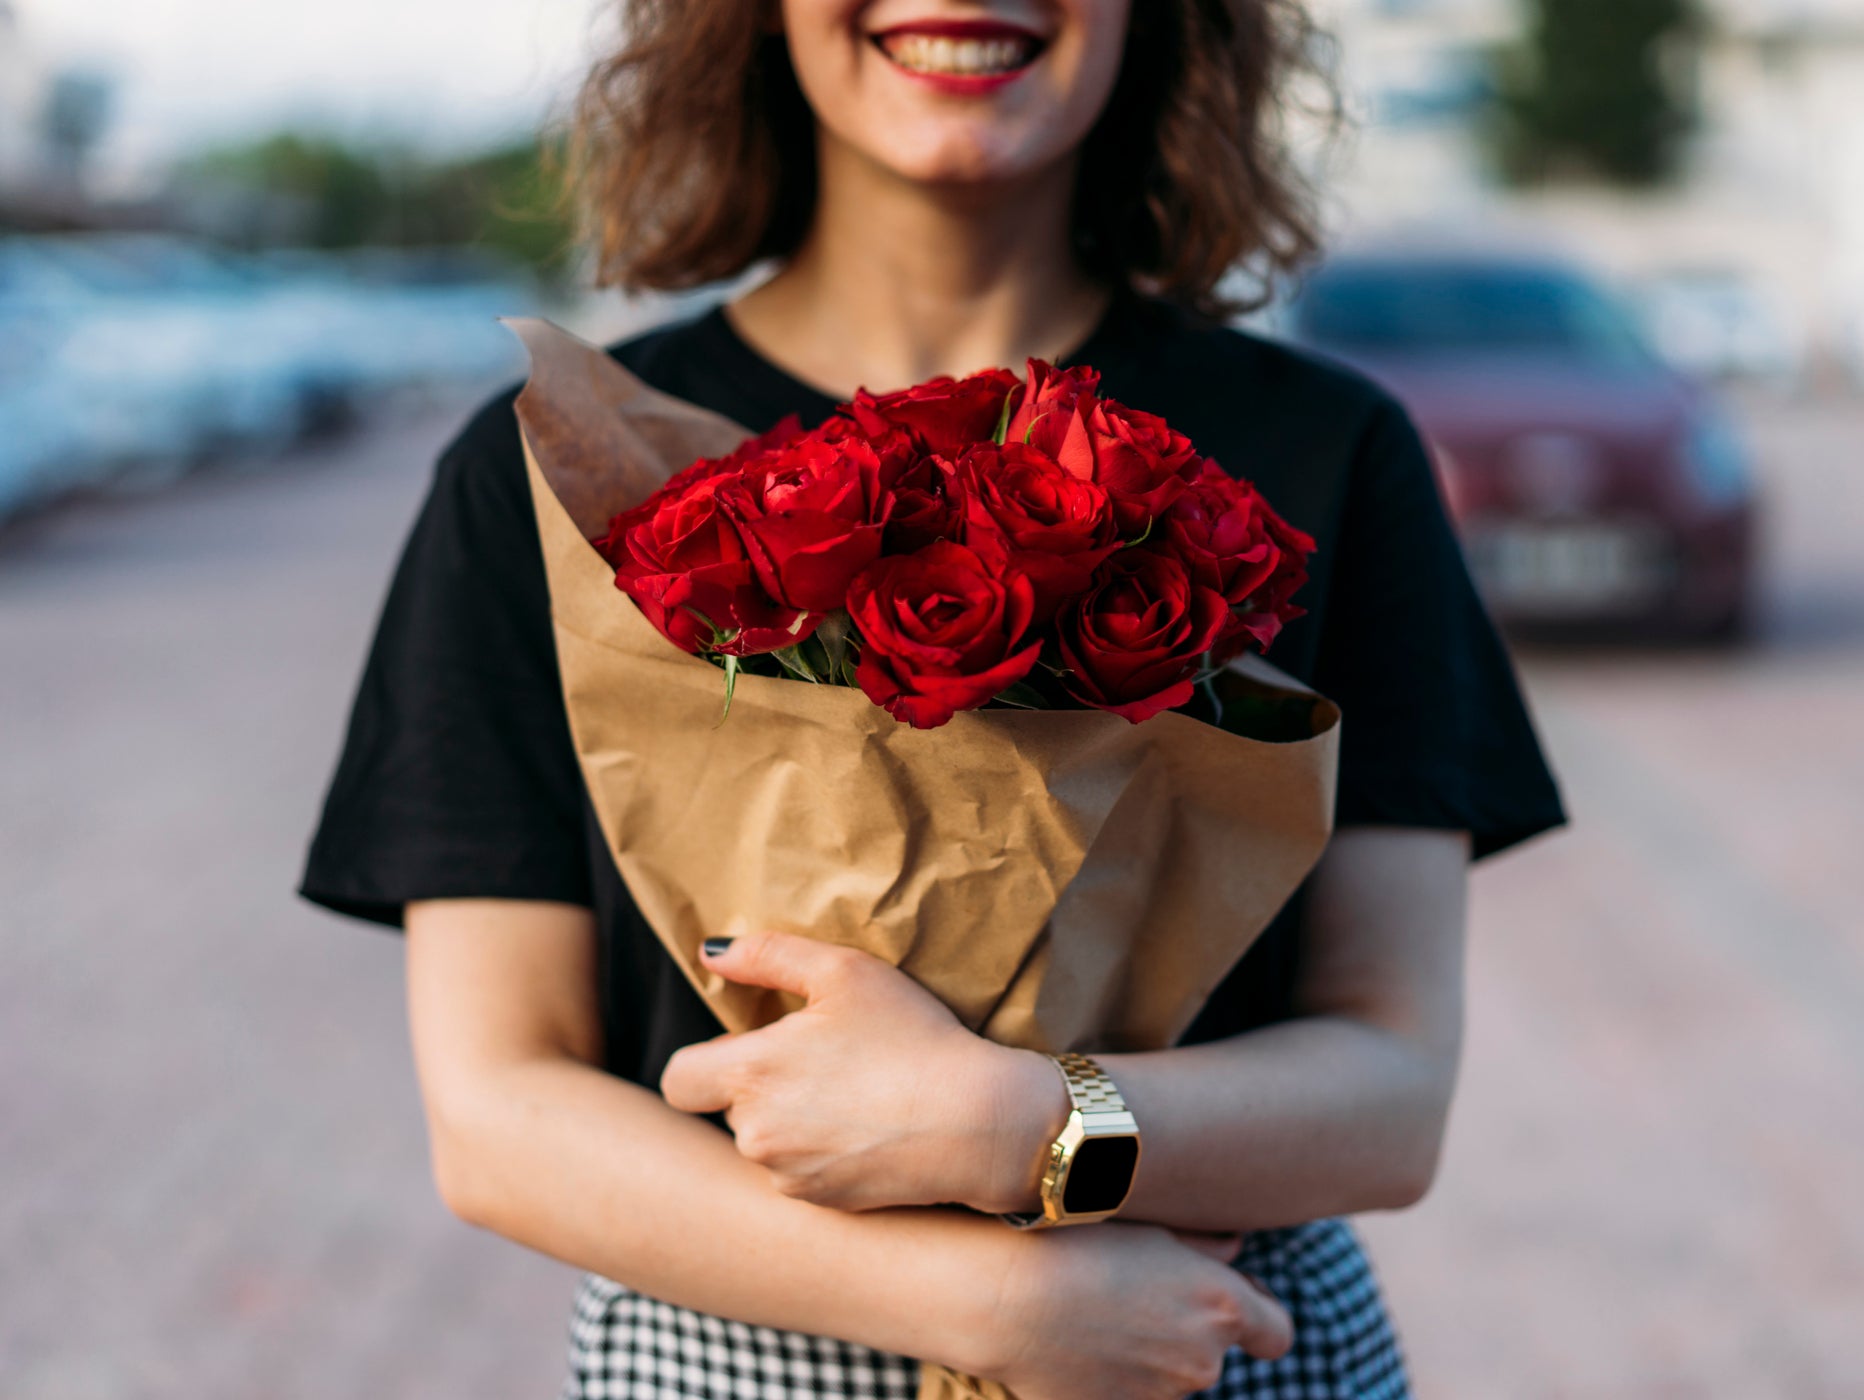 Roses are red: romantic gestures don’t have to be the preserve of romantic partners